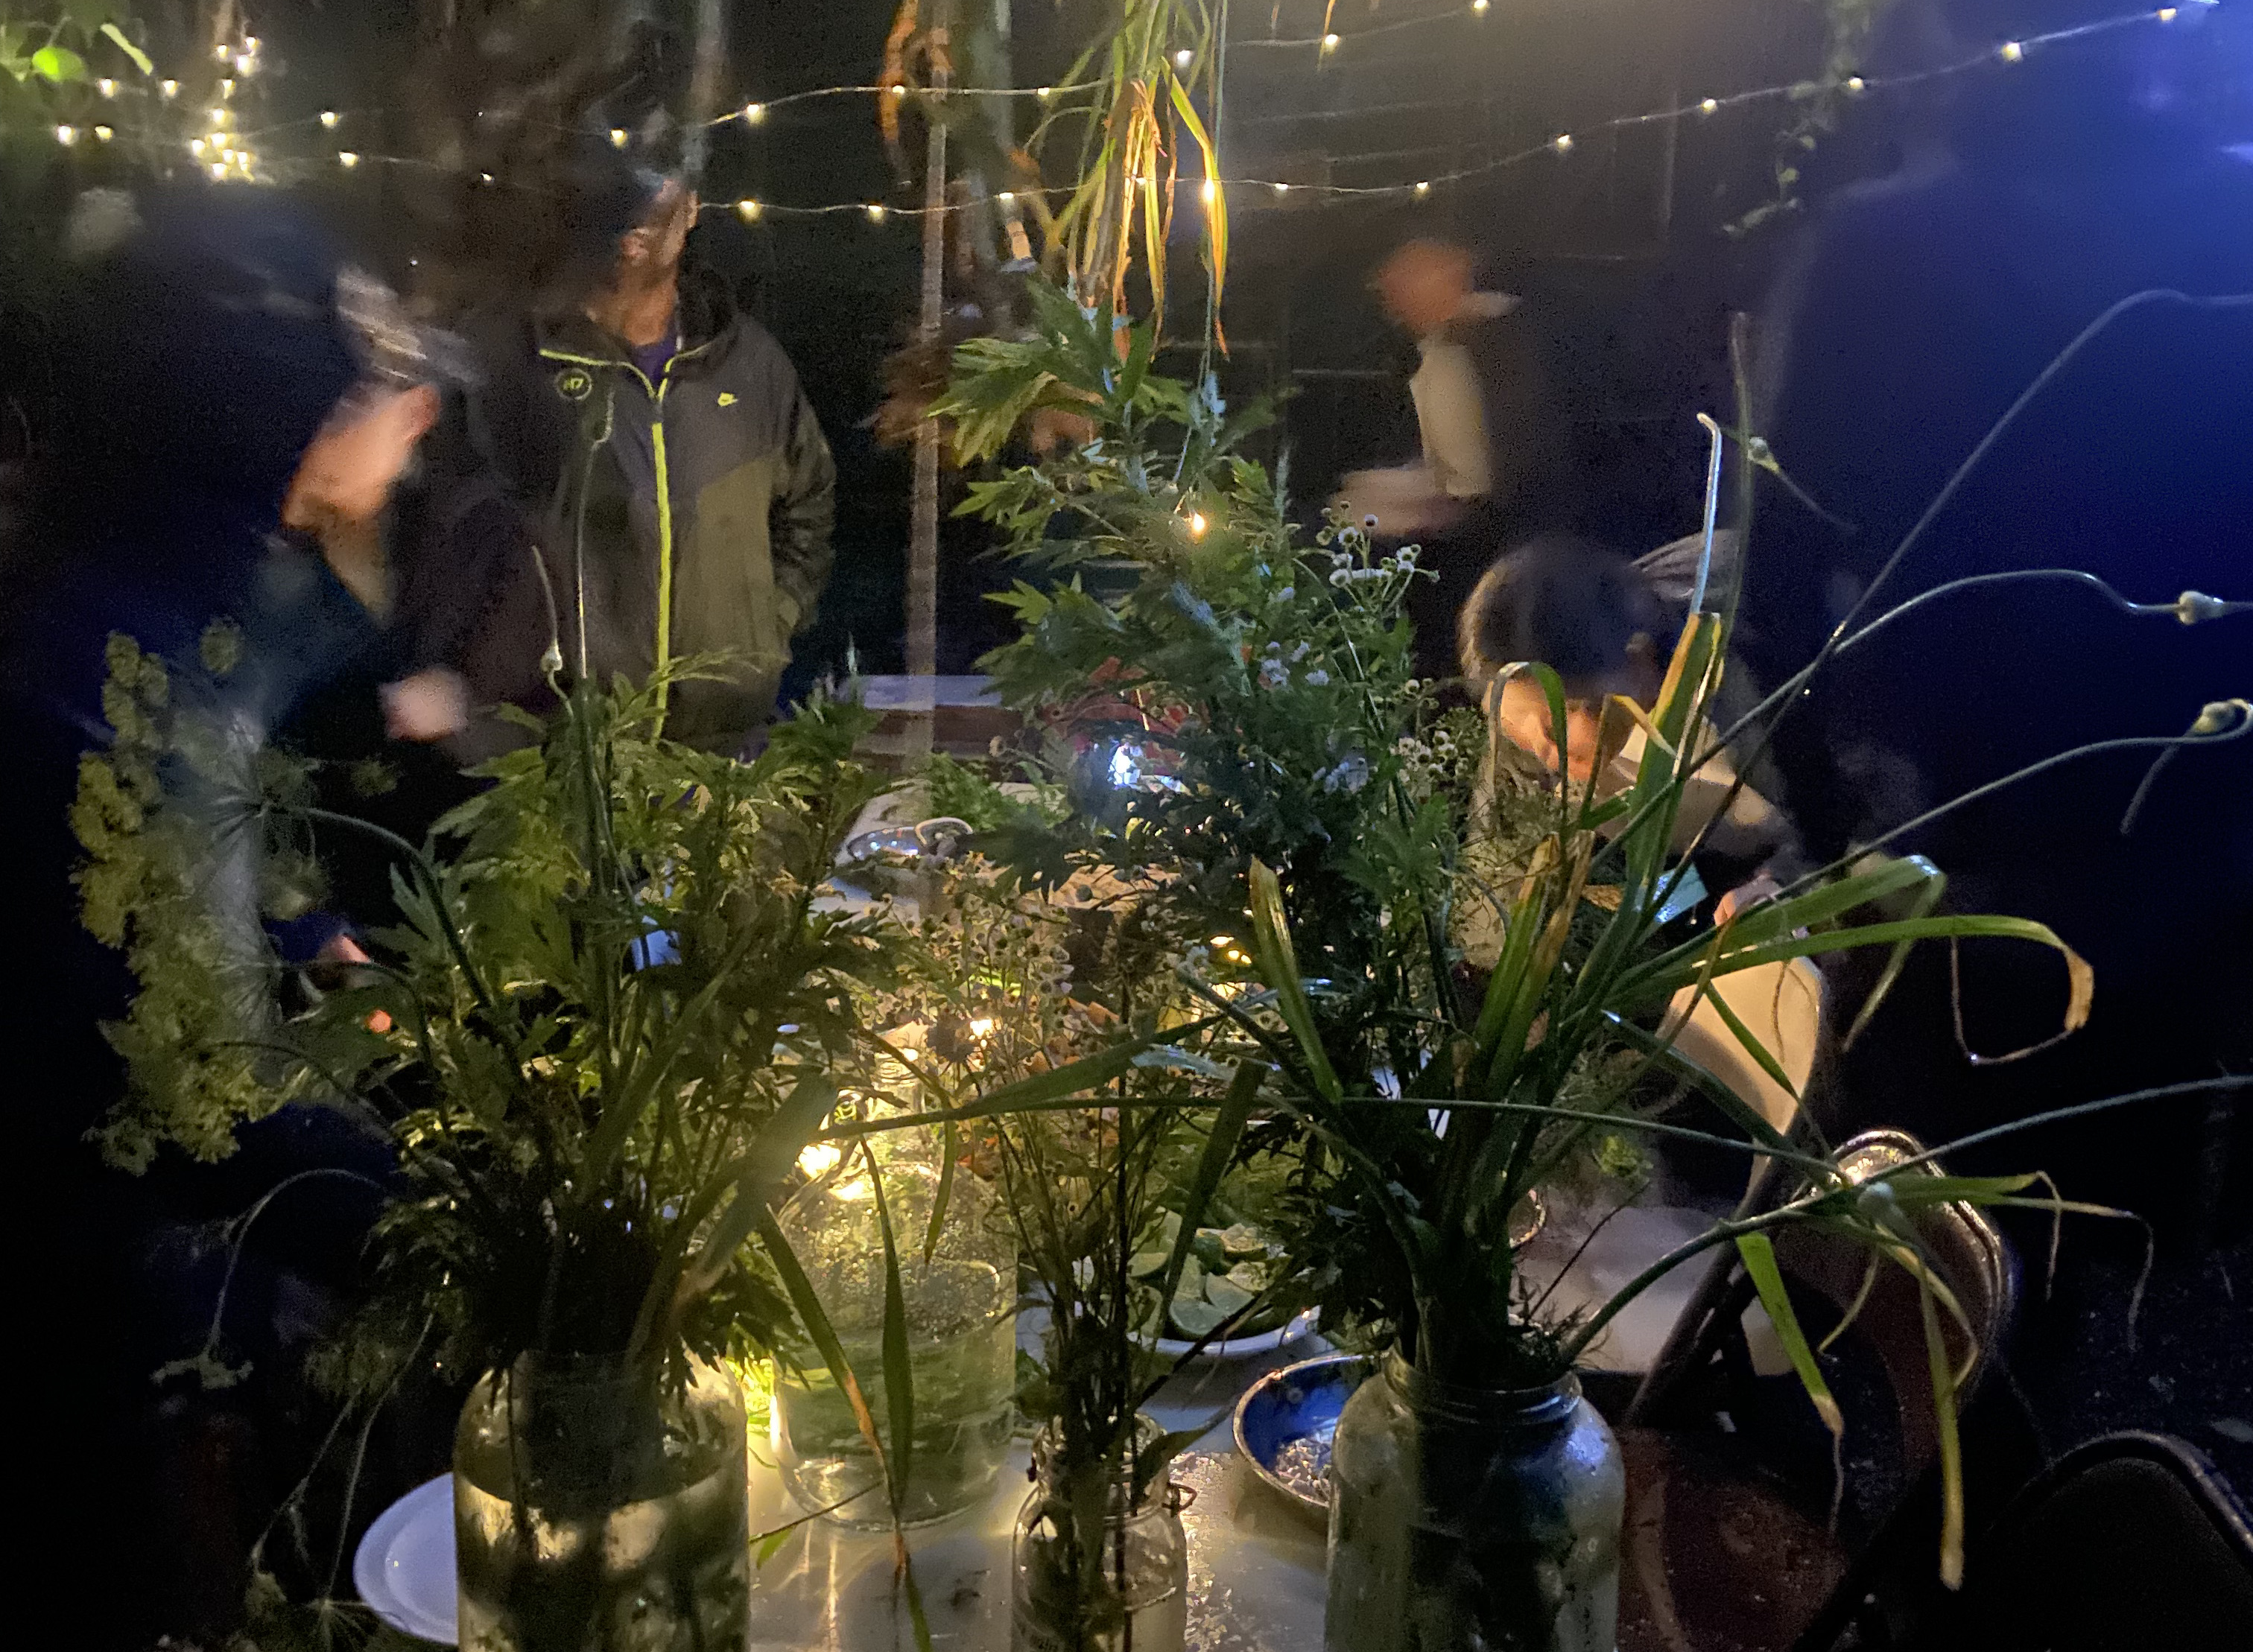 Outdoor nighttime communal dinner. People are gathered around a rectangular table that is covered in plants. The surrounding area is lit by white string lights. Some people are observing the table plants directly, while others are engaging in conversation with one another or just passing through.